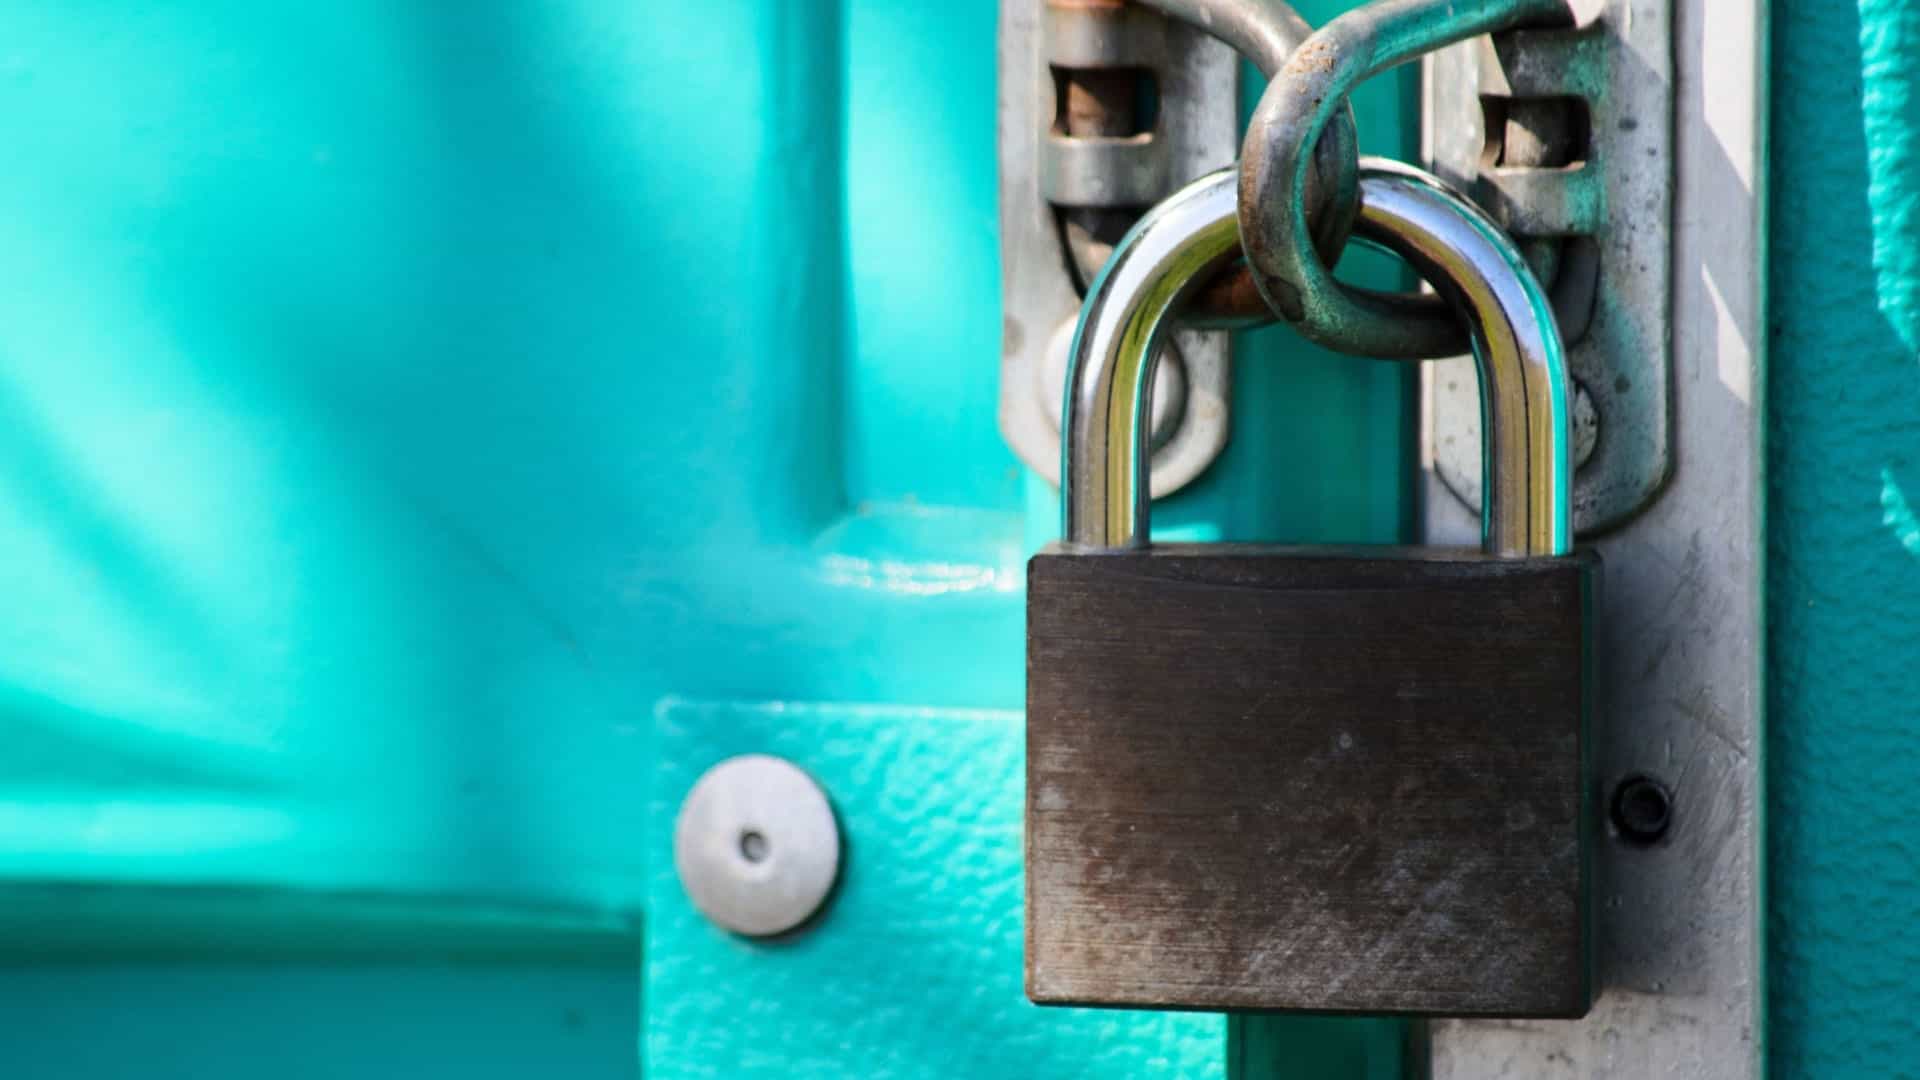 safeguarding your digital life: password managers, unique passwords, and 2fa